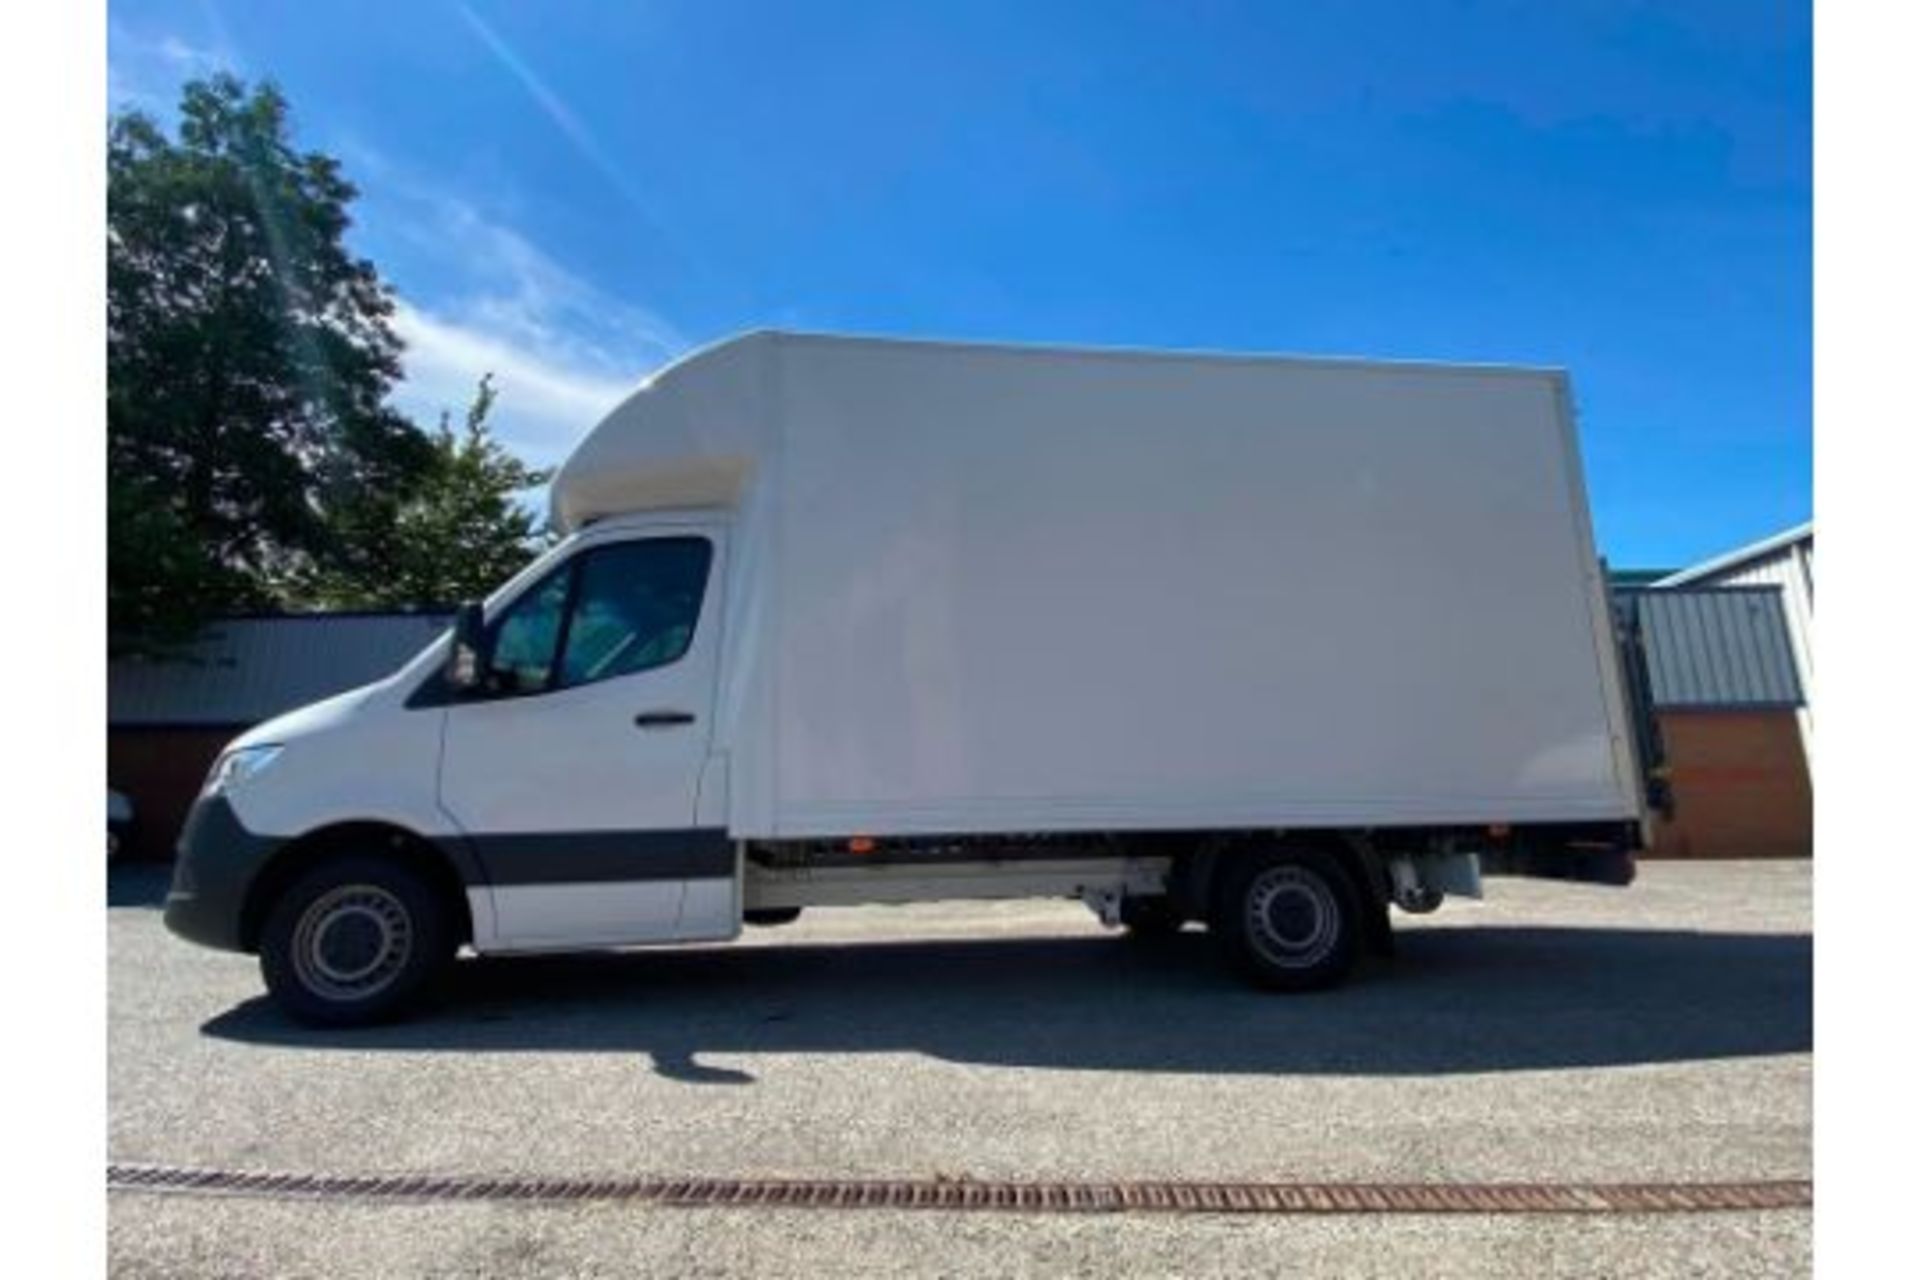 Mercedes Sprinter 314Cdi LWB Luton Body with TL - 2020 20 Reg 1 Owner From New - New Shape - Image 3 of 8